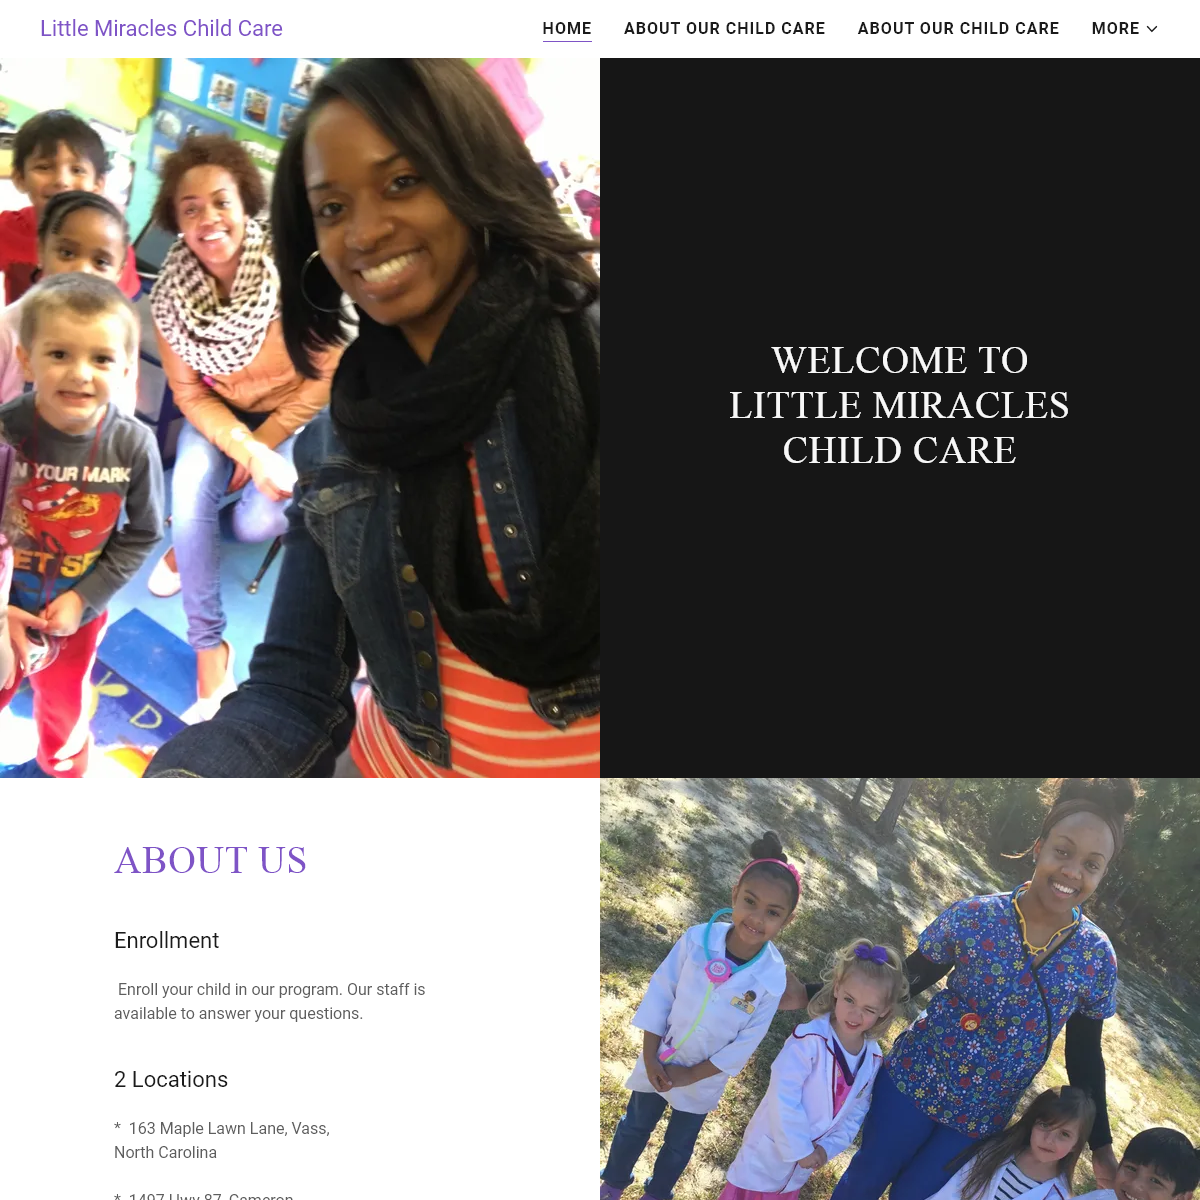 A complete backup of littlemiracleschildcare.org